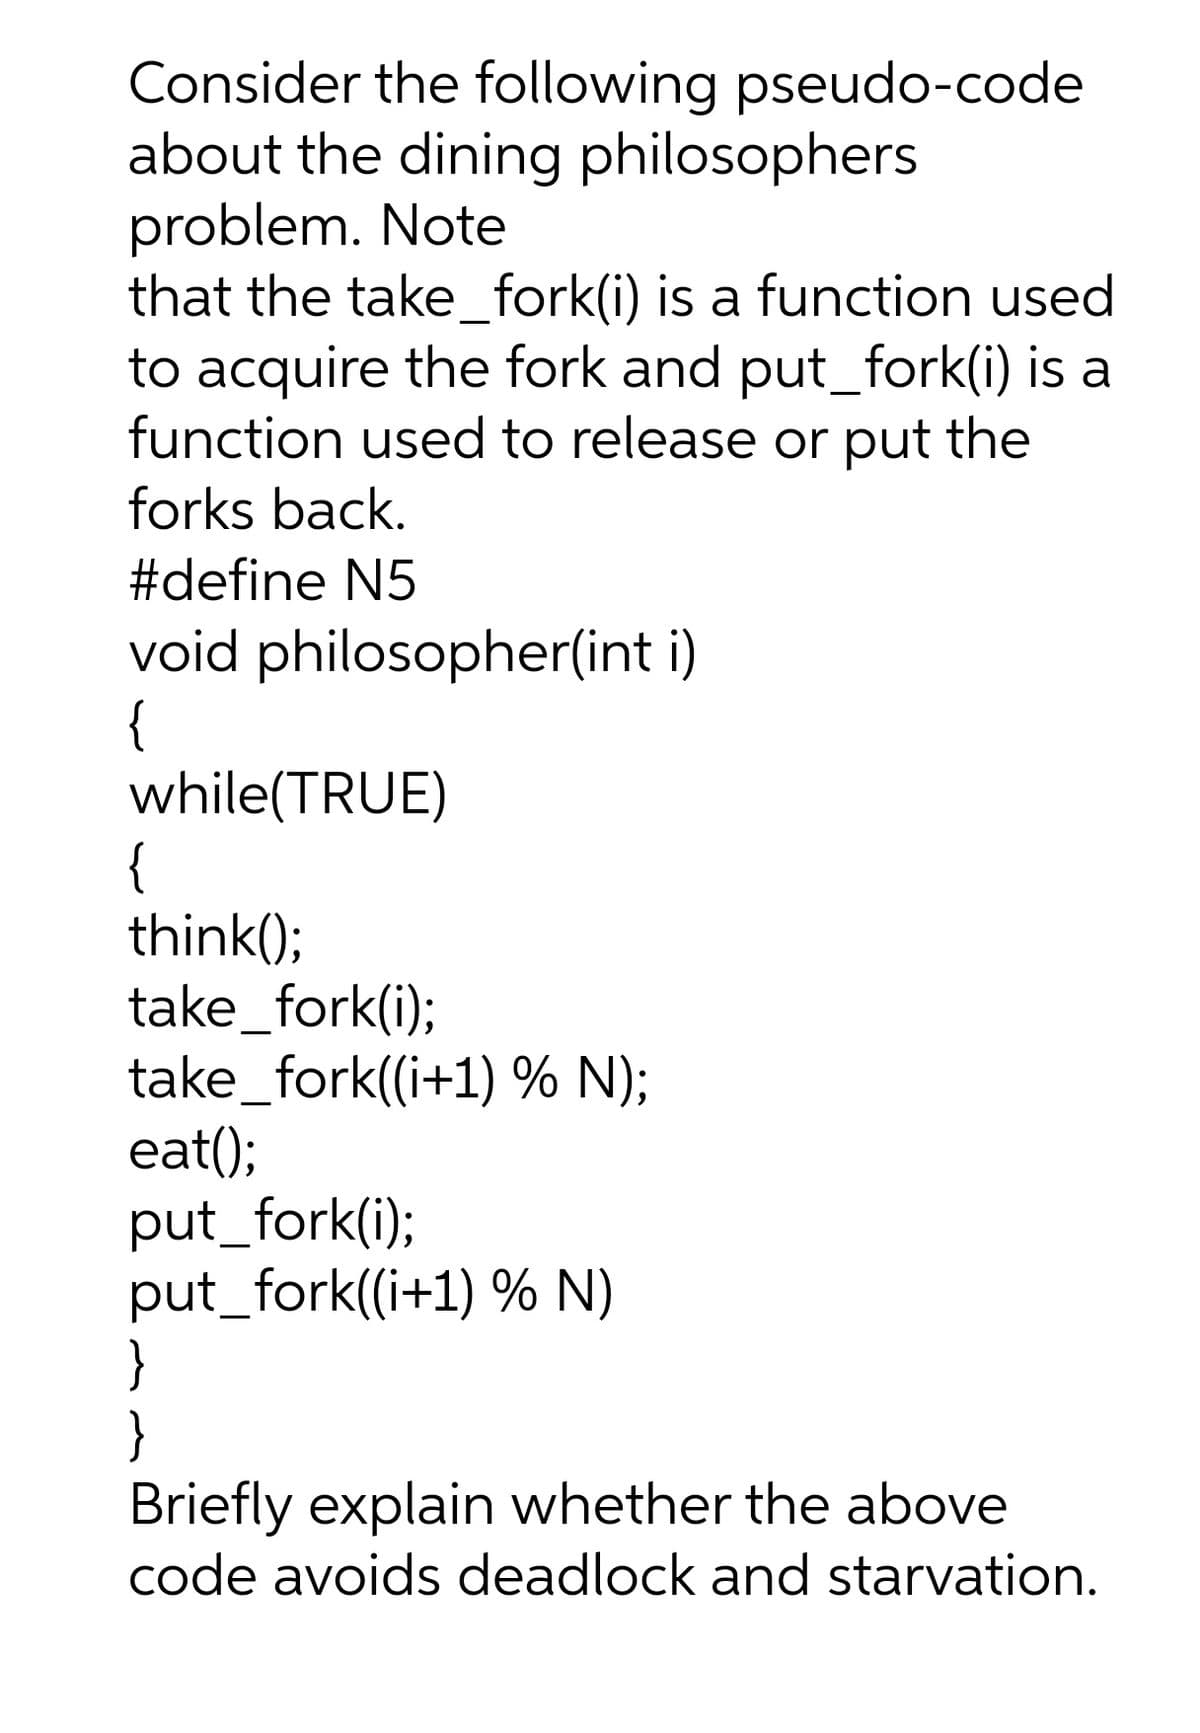 Consider the following pseudo-code
about the dining philosophers
problem. Note
that the take_fork(i) is a function used
to acquire the fork and put_fork(i) is a
function used to release or put the
forks back.
#define N5
void philosopher(int i)
{
while(TRUE)
{
think();
take_fork(i);
take_fork((i+1) % N);
eat();
put_fork(i);
put_fork((i+1) % N)
}
}
Briefly explain whether the above
code avoids deadlock and starvation.
